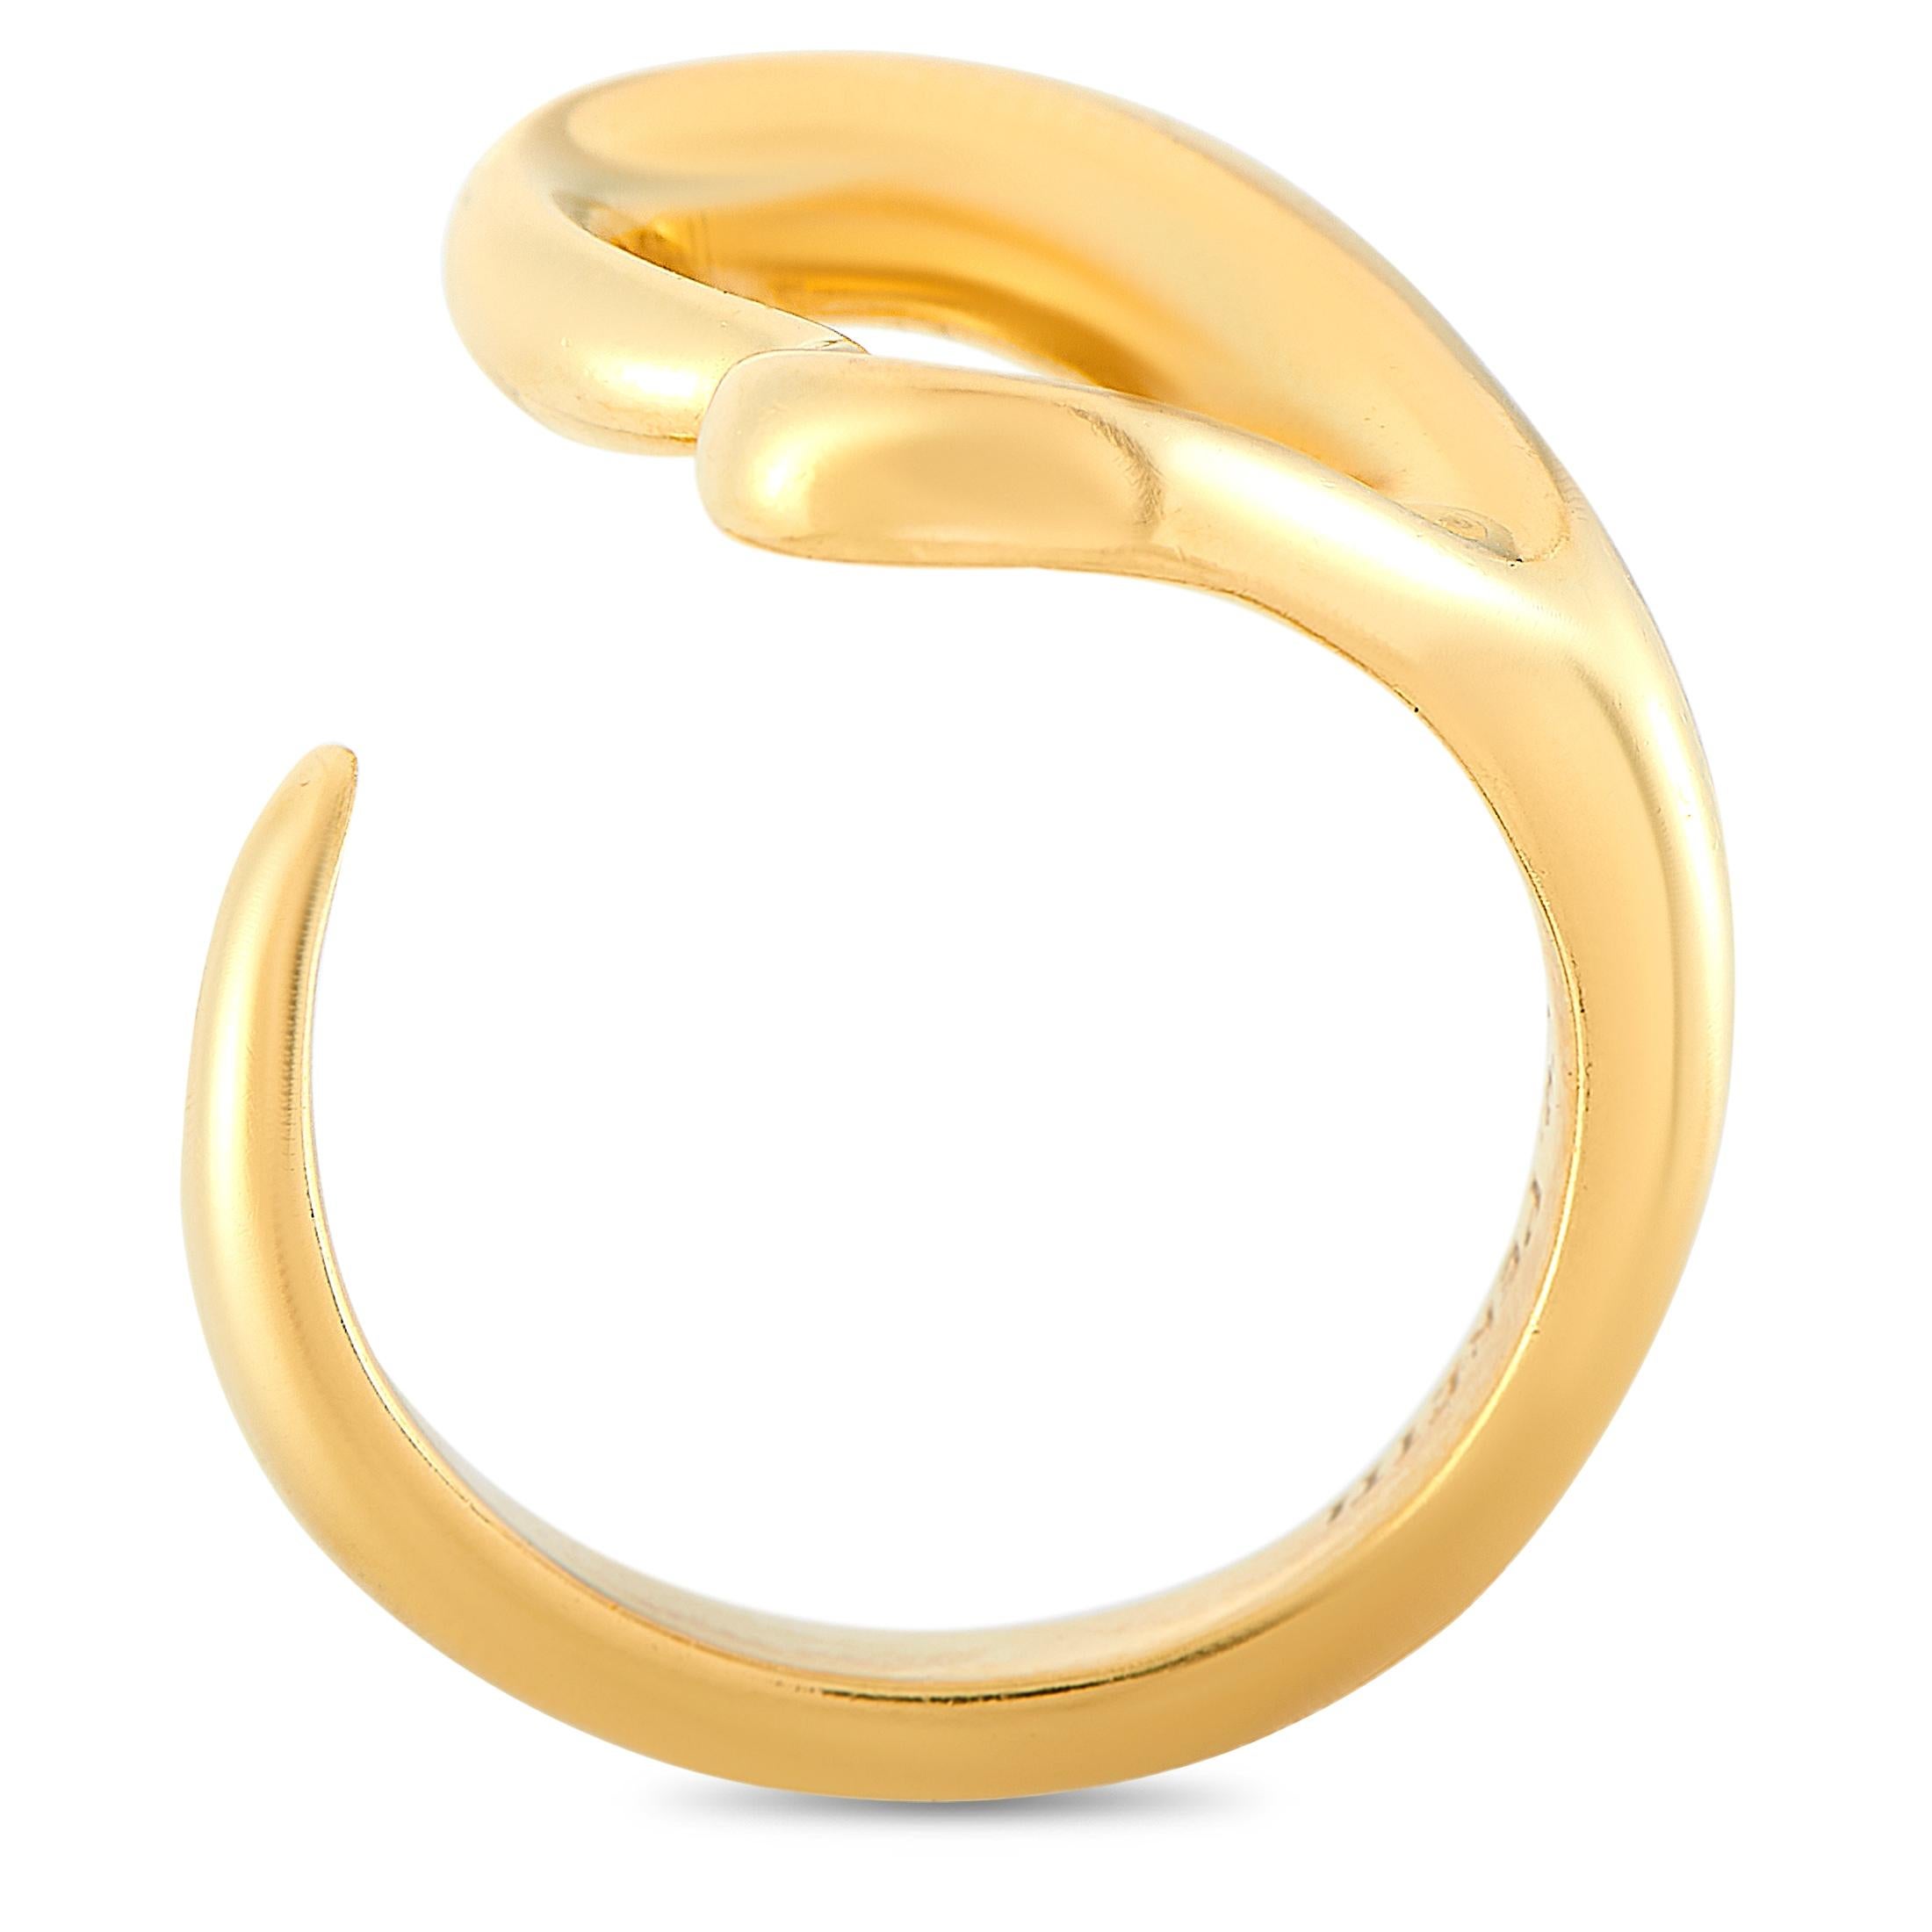 The Tiffany & Co. Elsa Peretti ring is crafted from 18K yellow gold and weighs 8.8 grams. The ring boasts band thickness of 3 mm and top height of 3 mm, while top dimensions measure 15 by 18 mm.

This item is offered in estate condition and includes